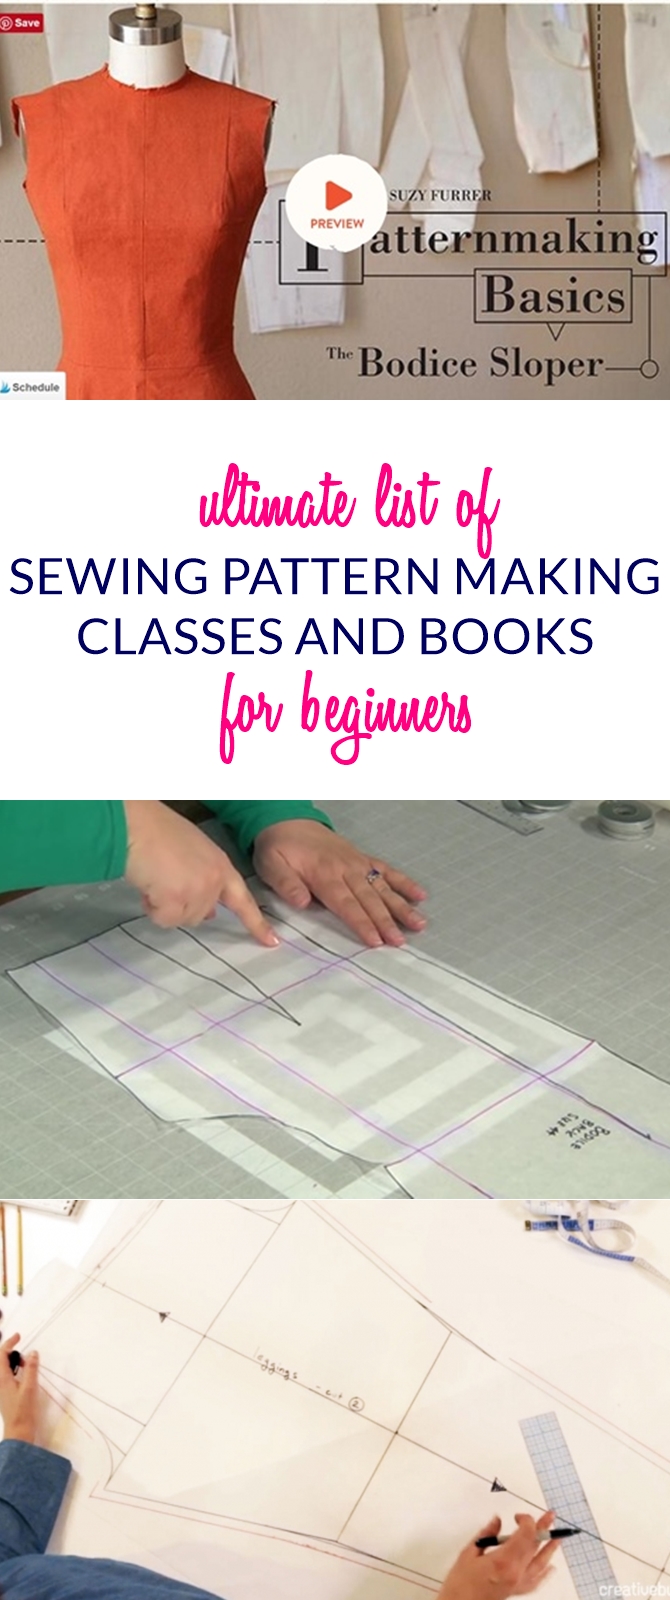 ultimate list of sewing pattern making resources for beginners